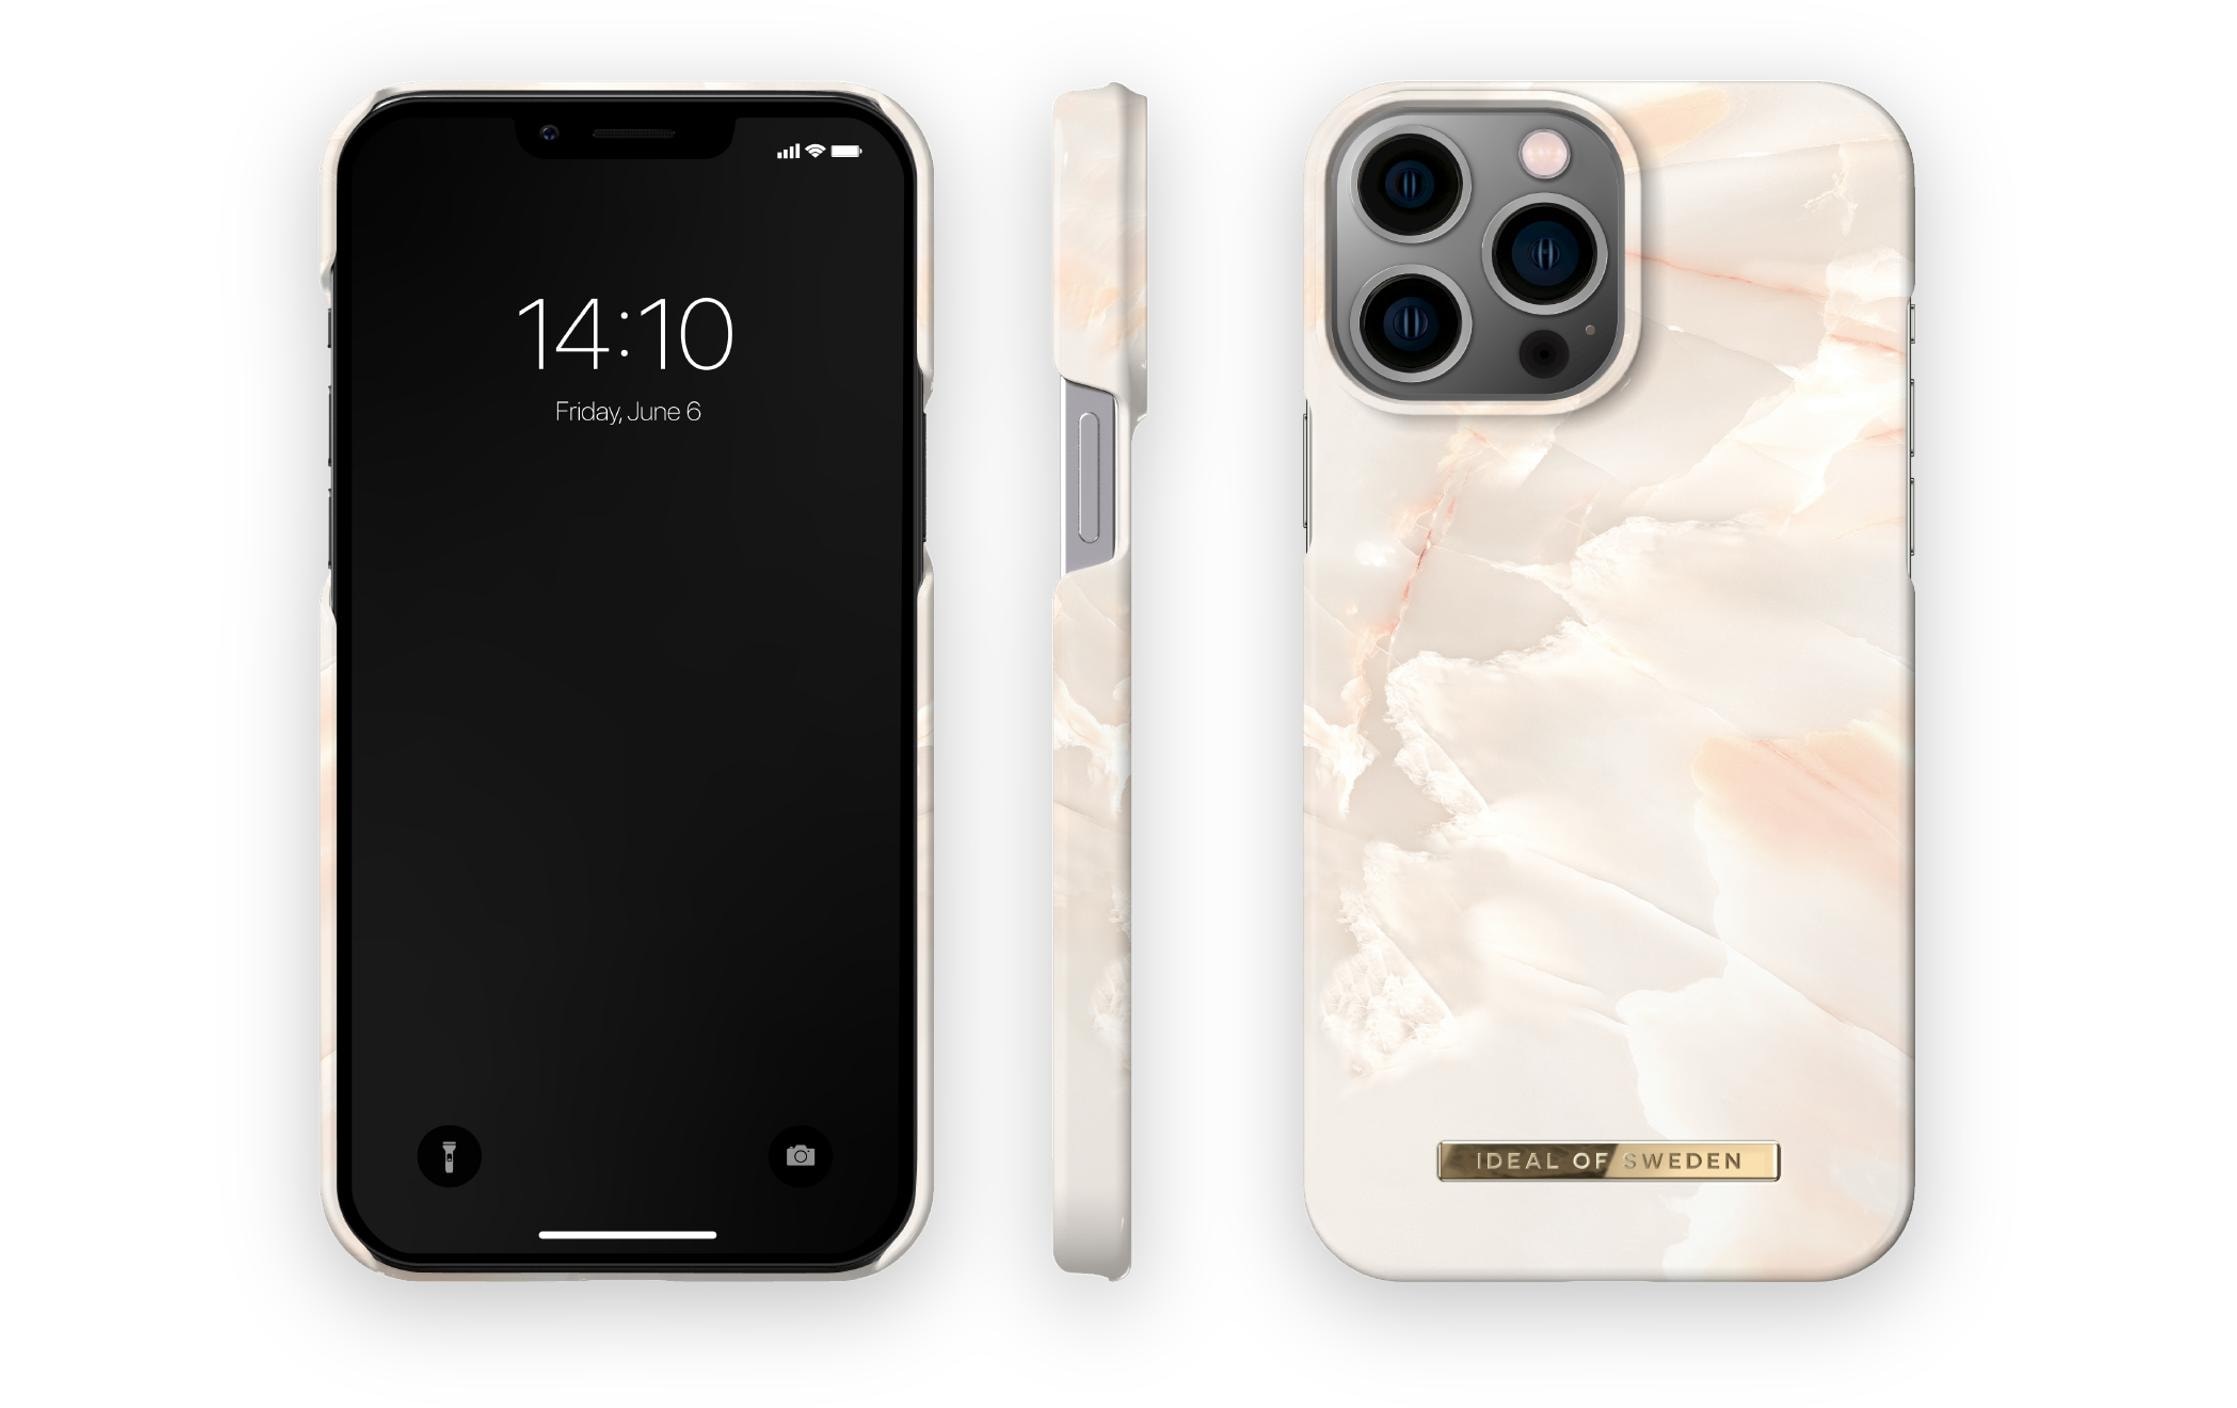 iDeal of Sweden Smartphone-Hülle »Rose Pearl Marble iPhone 14 Pro Max«